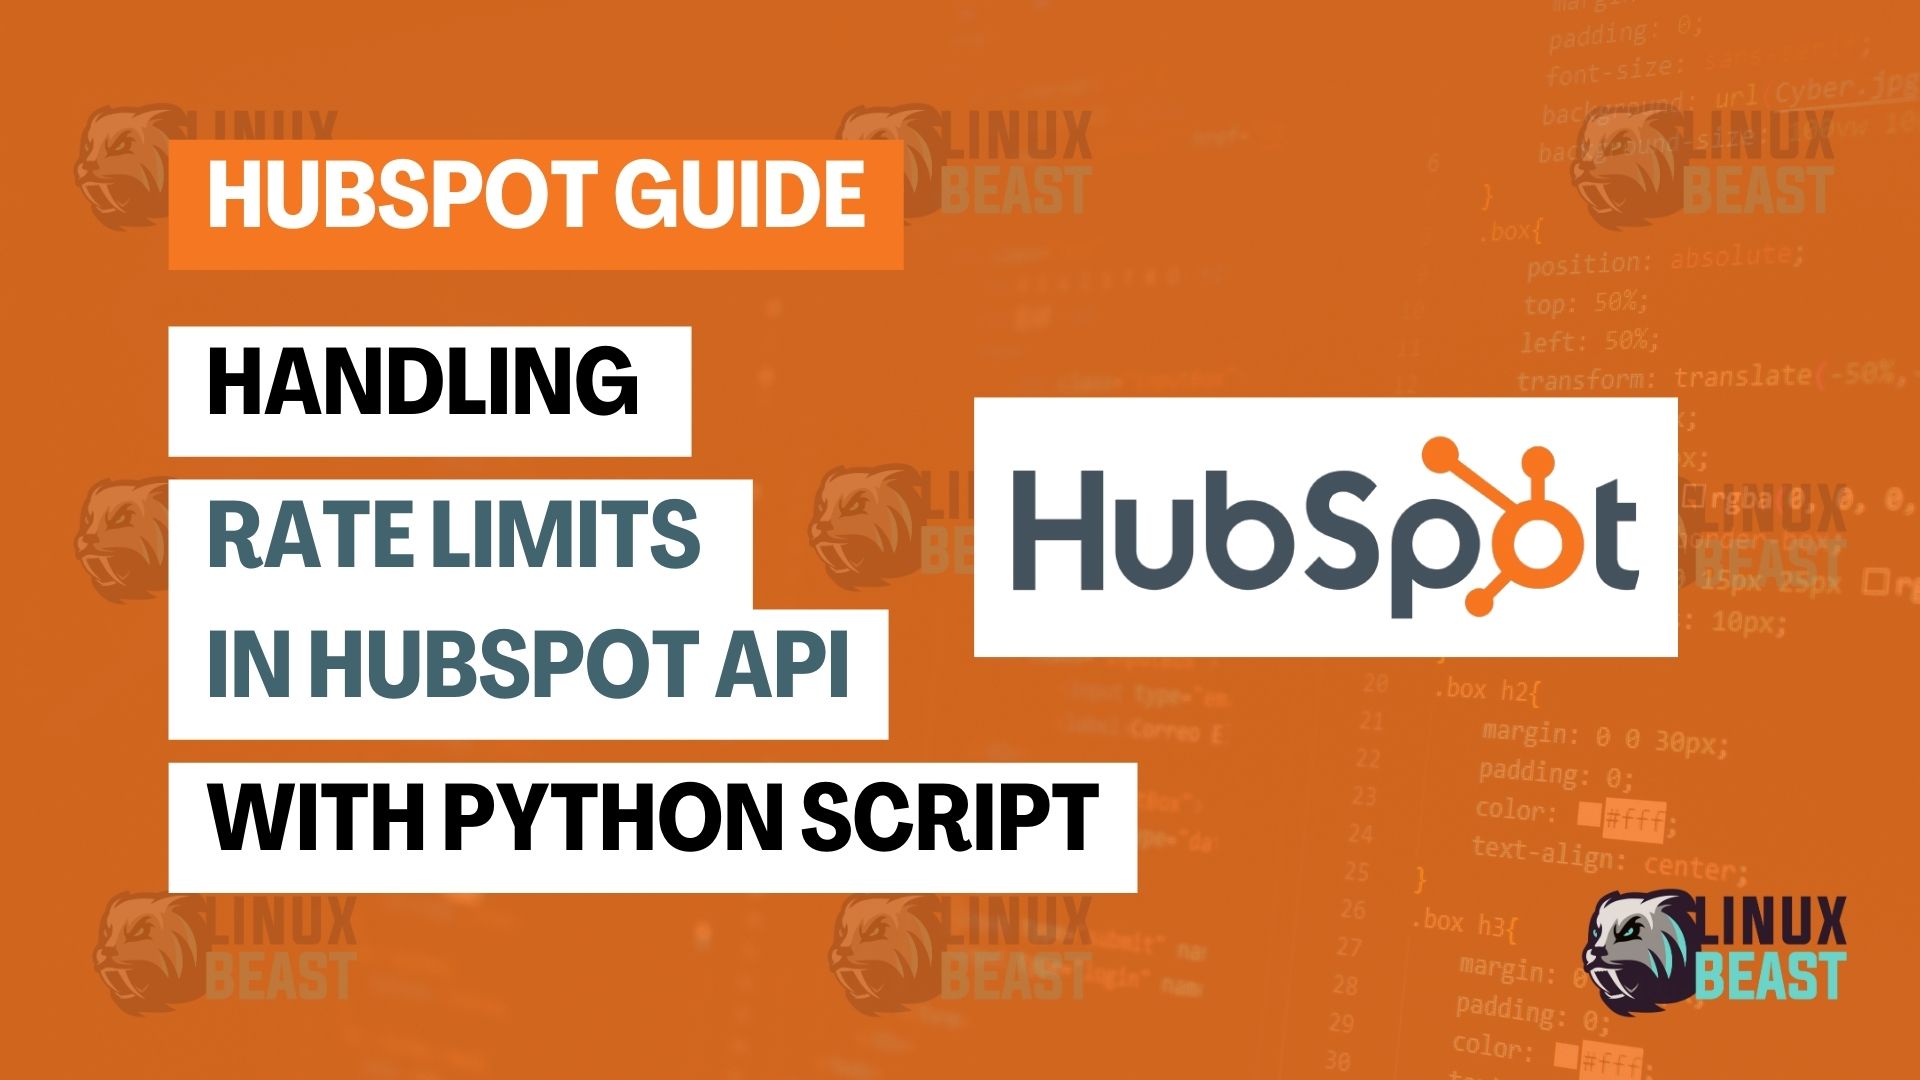 Handling Rate Limits in HubSpot API with Python Script